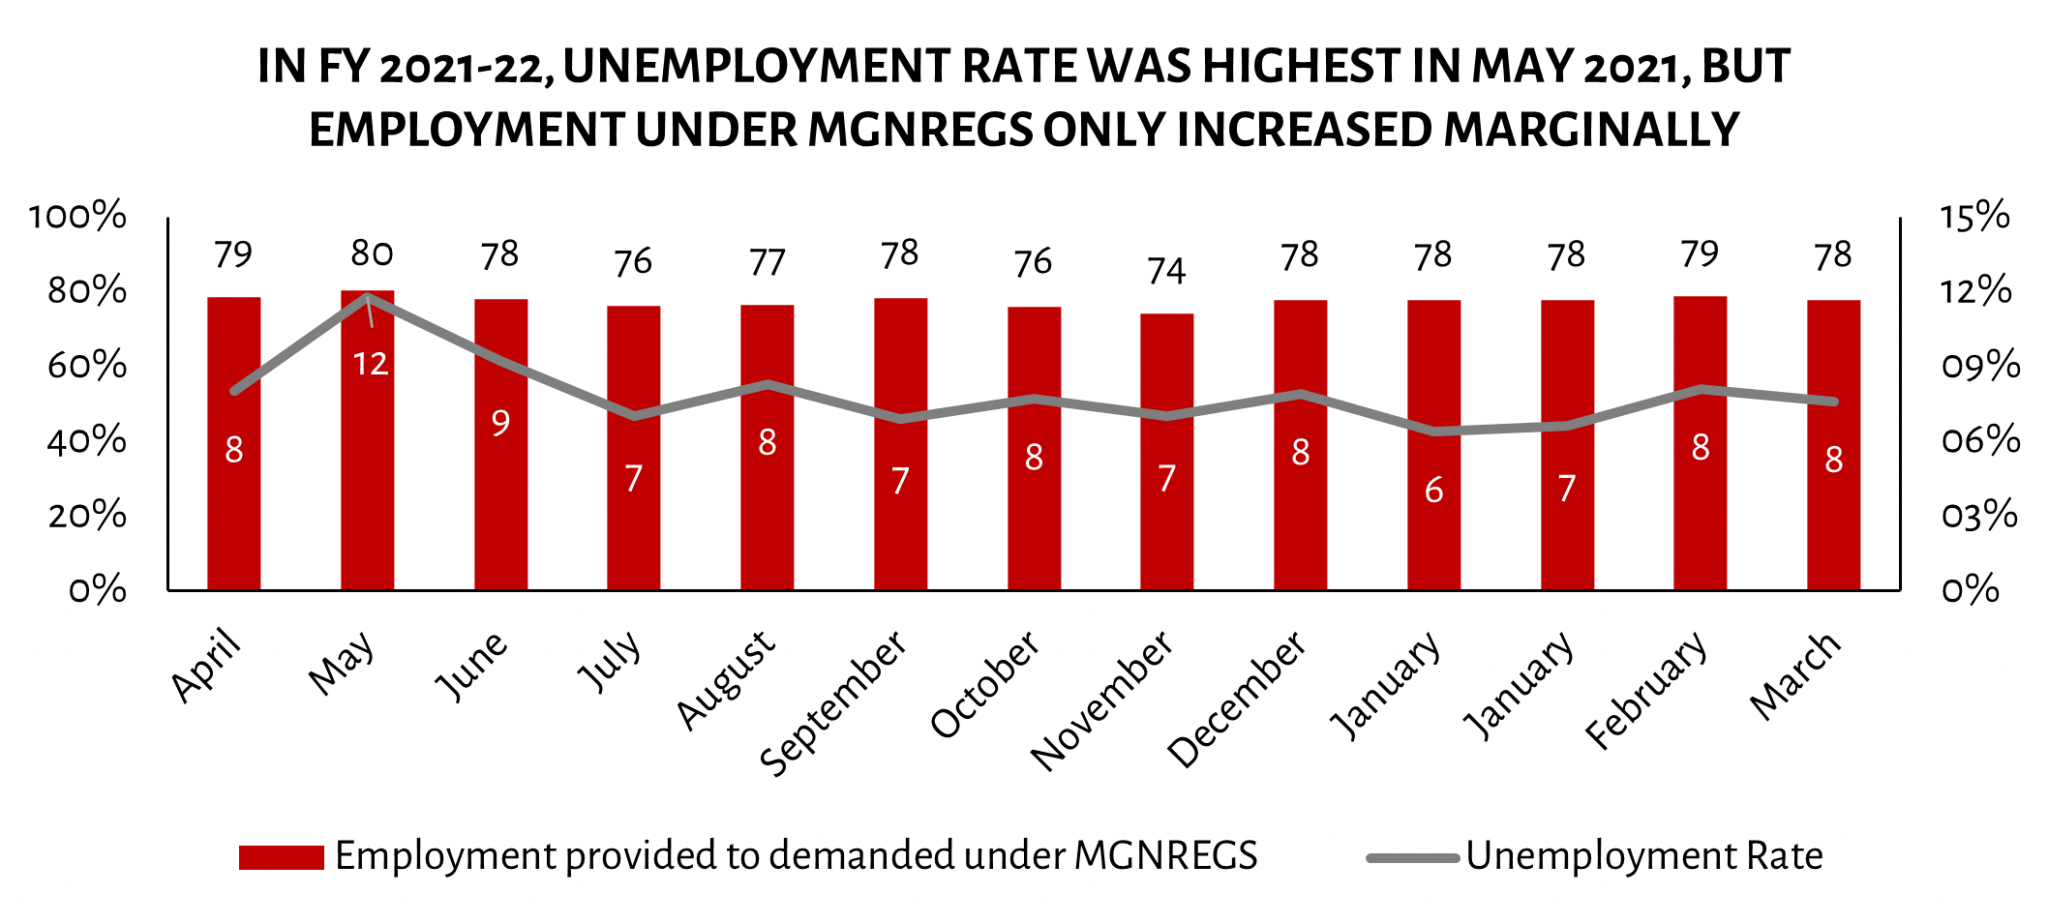 Decrease in Funds for MGNREGS Amidst Increasing Rural Unemployment